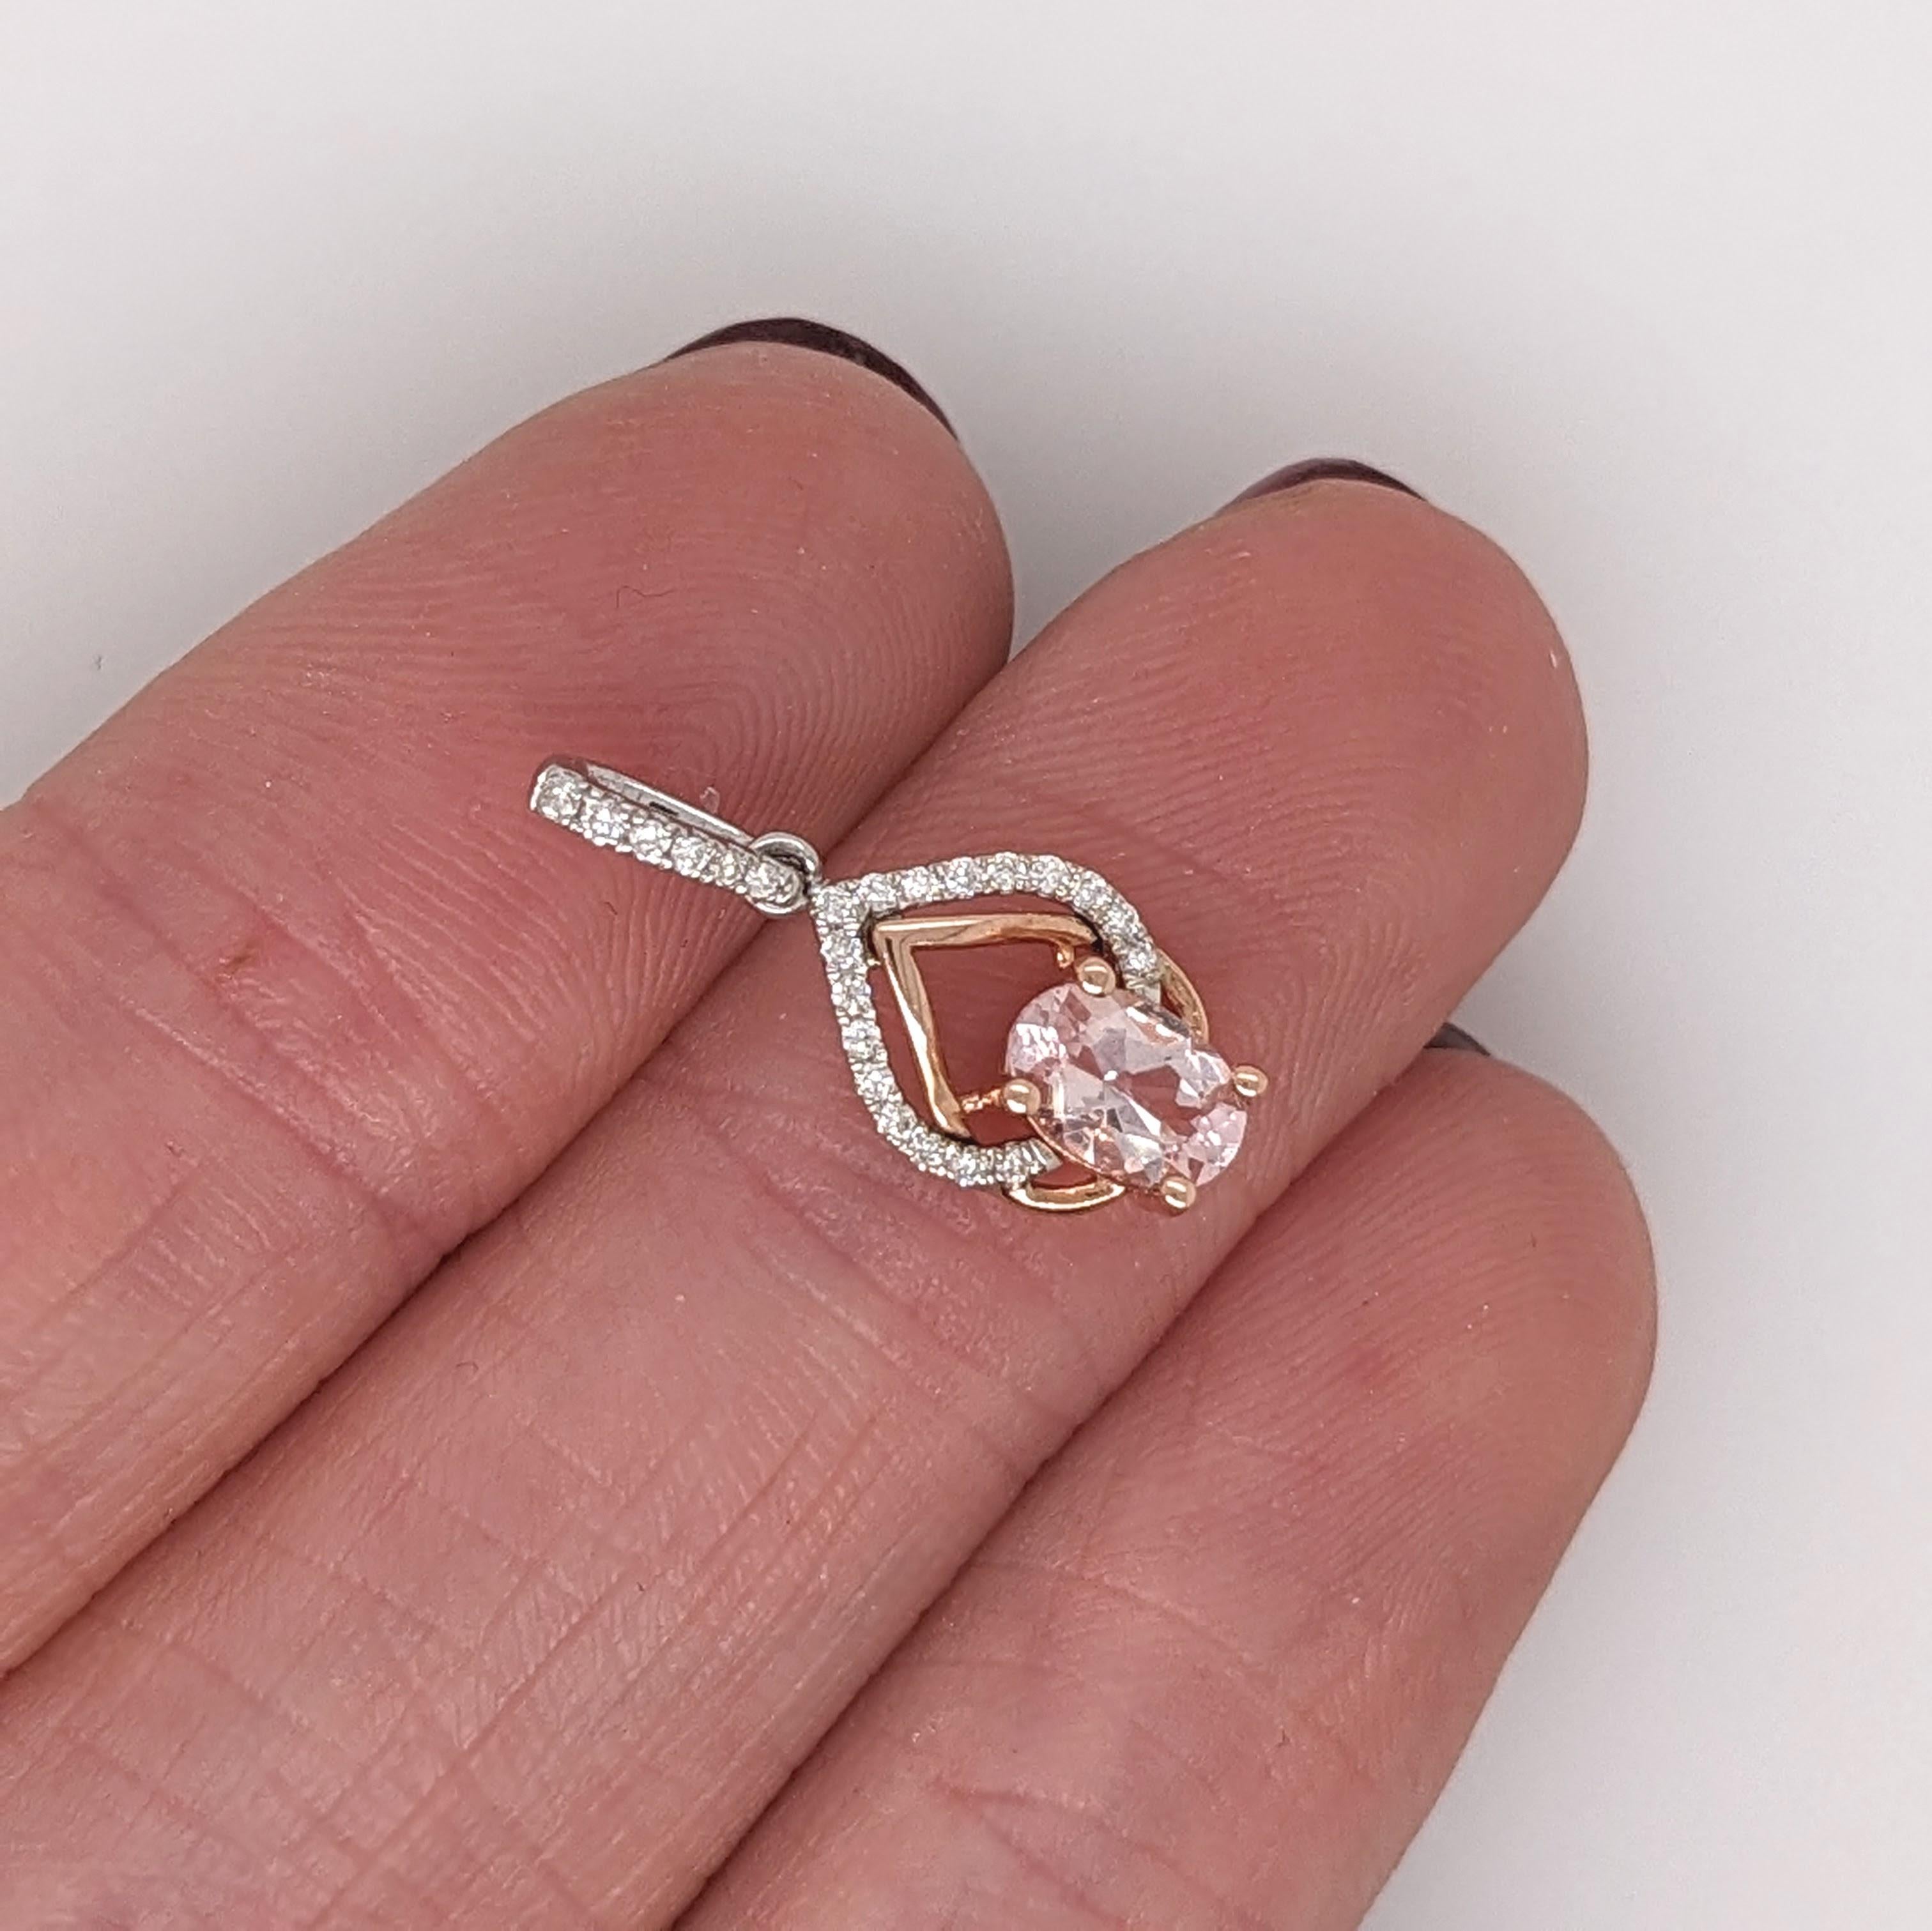 This beautiful pendant features a 0.40 carat oval morganite gemstone with natural earth mined diamonds all set in solid 14K dual - rose and white gold. This pendant makes a lovely June birthstone gift for your loved ones! 

Specifications

Item